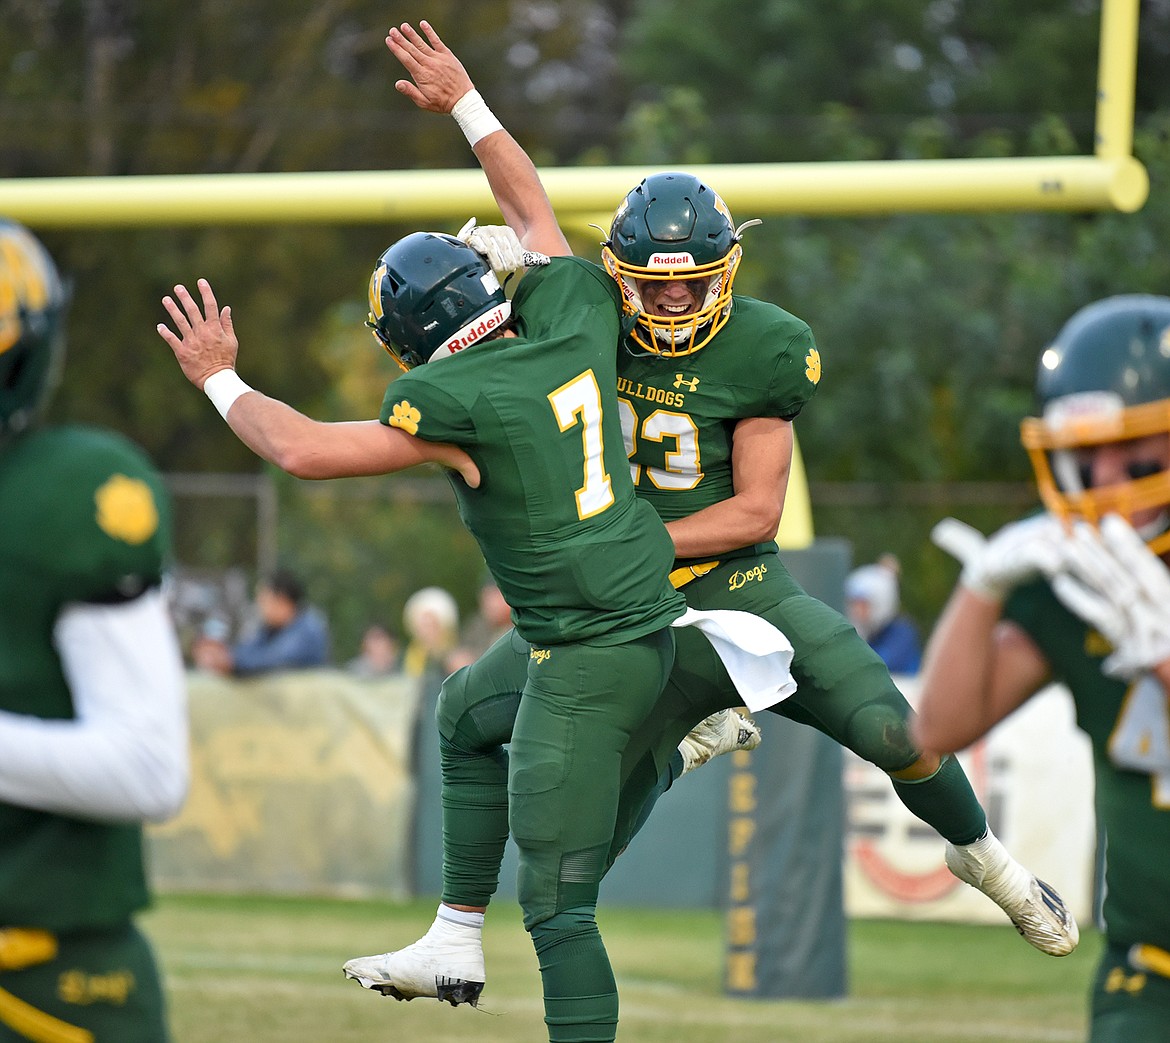 Whitefish's Fynn Ridgeway and Ty Schwaiger celebrate a touchdown in the first half of a game against East Helena on Friday in Whitefish. (Whitney England/Whitefish Pilot)